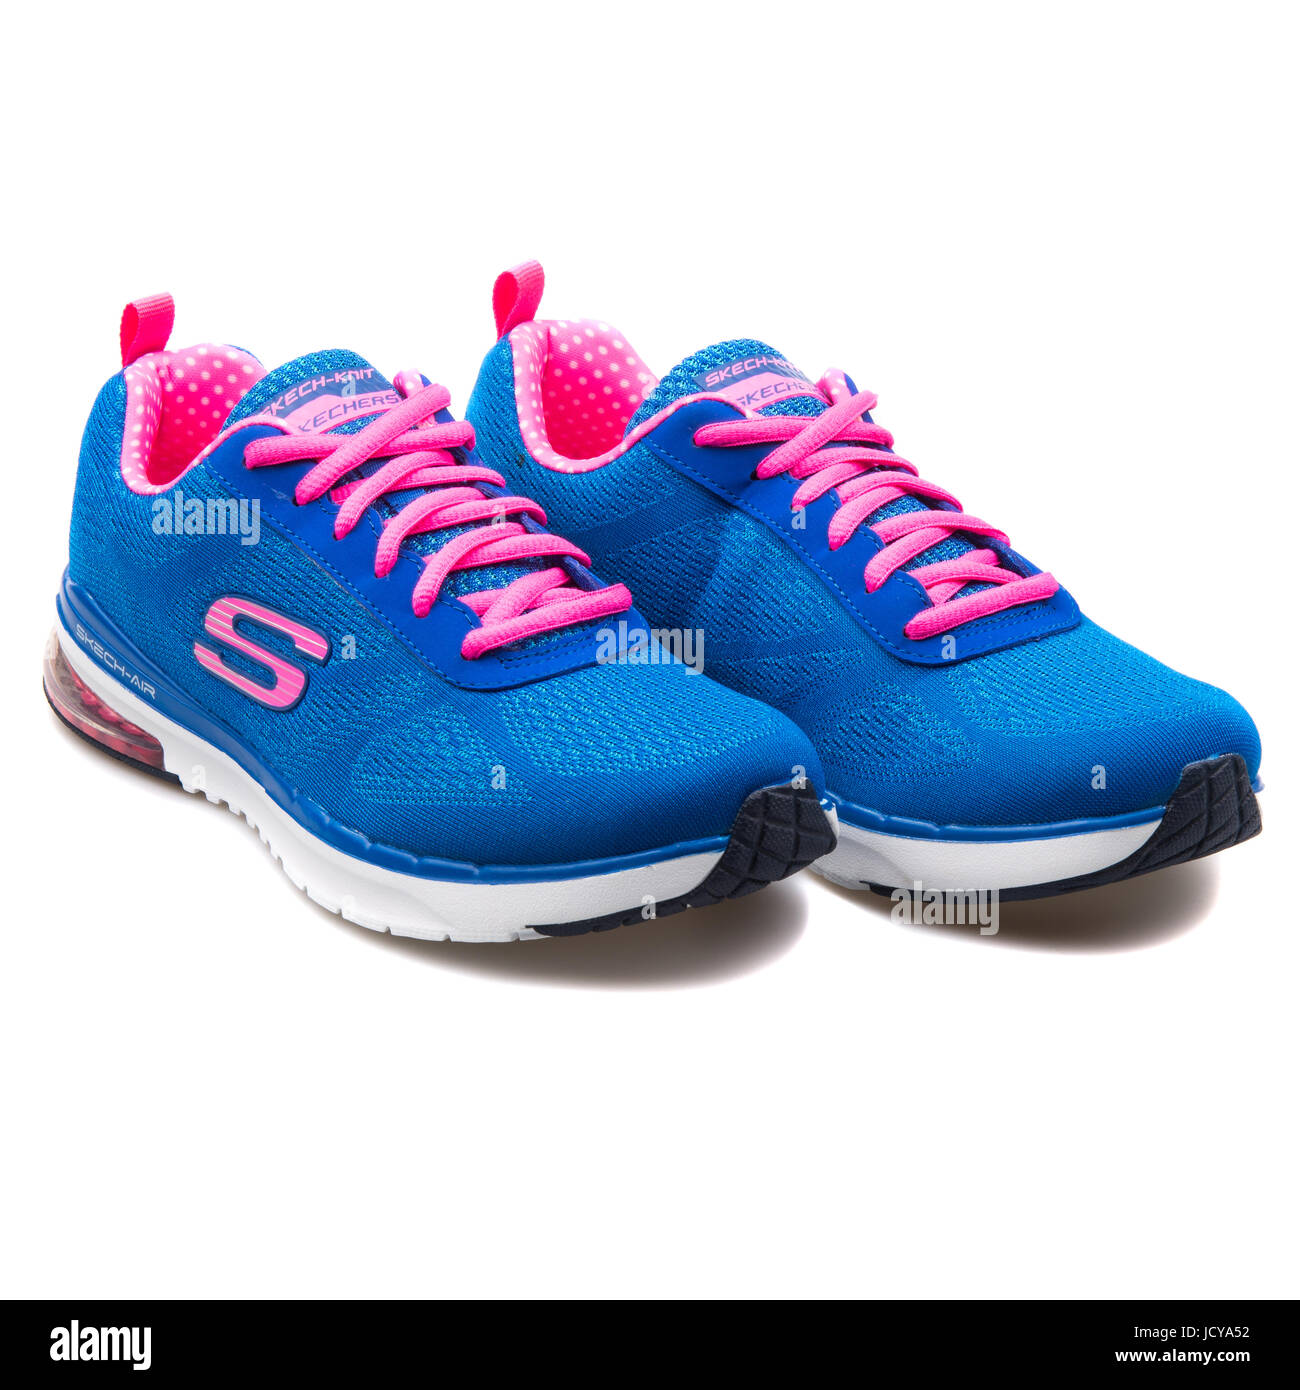 Skechers Skech-Air Infinity Blue and 